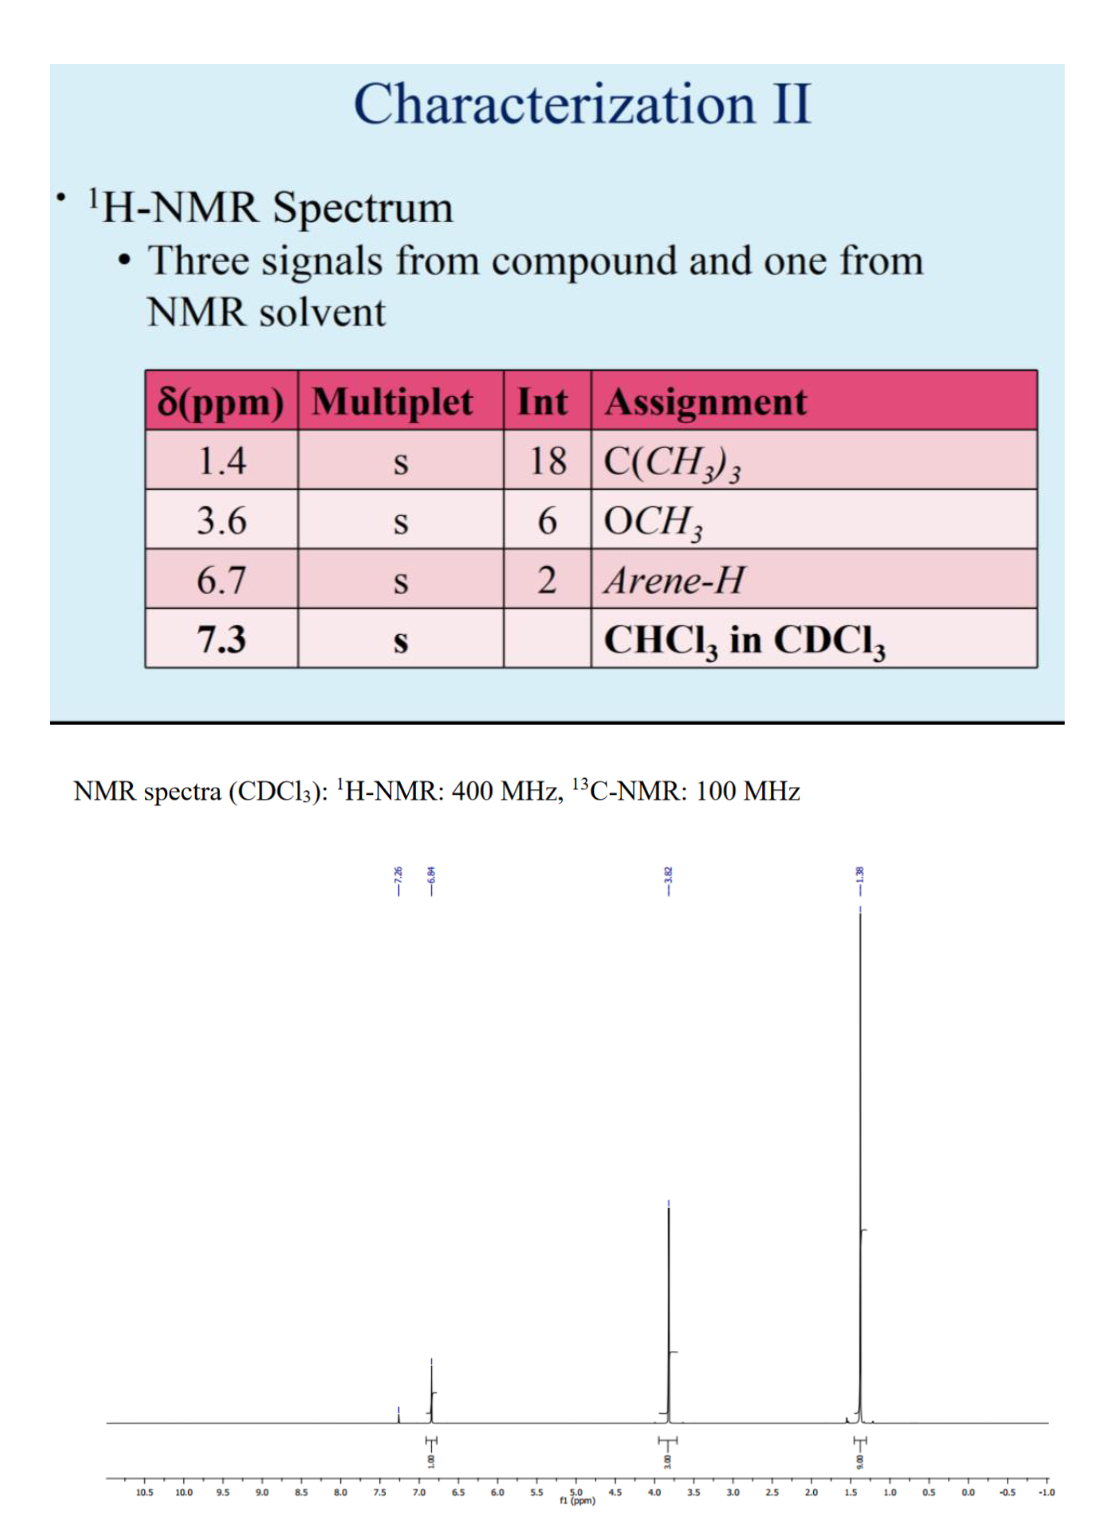 Characterization II
• 'H-NMR Spectrum
• Three signals from compound and one from
NMR solvent
8(ppm) Multiplet Int Assignment
18 | С(CH)
6 ОСН,
1.4
S
3
3.6
S
6.7
S
2 Arene-H
7.3
CHCI; in CDCI3
S
NMR spectra (CDC13): 'H-NMR: 400 MHz, 1³C-NMR: 100 MHz
10.5
10.0
9.5
9.0
8.5
8.0
7.5
7.0
6.5
6.0
5.5
5.0
fi (ppm)
0.5
4.5
4.0
3.5
3.0
2.5
2.0
1.5
1.0
0.0
-0.5
-1.0
